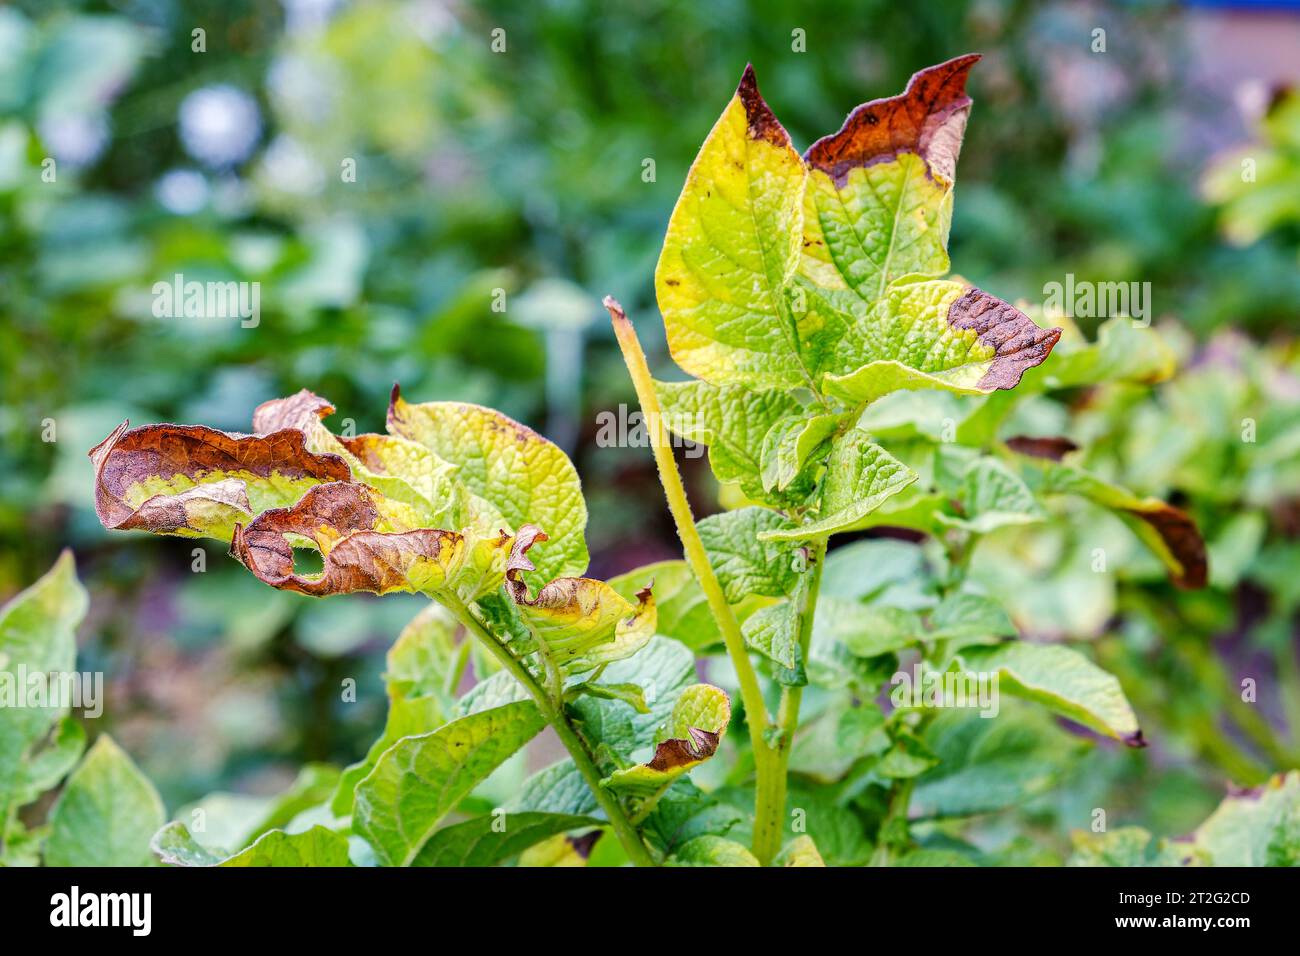 Phytophthora. A disease affecting the leaves of potato plants Stock Photo